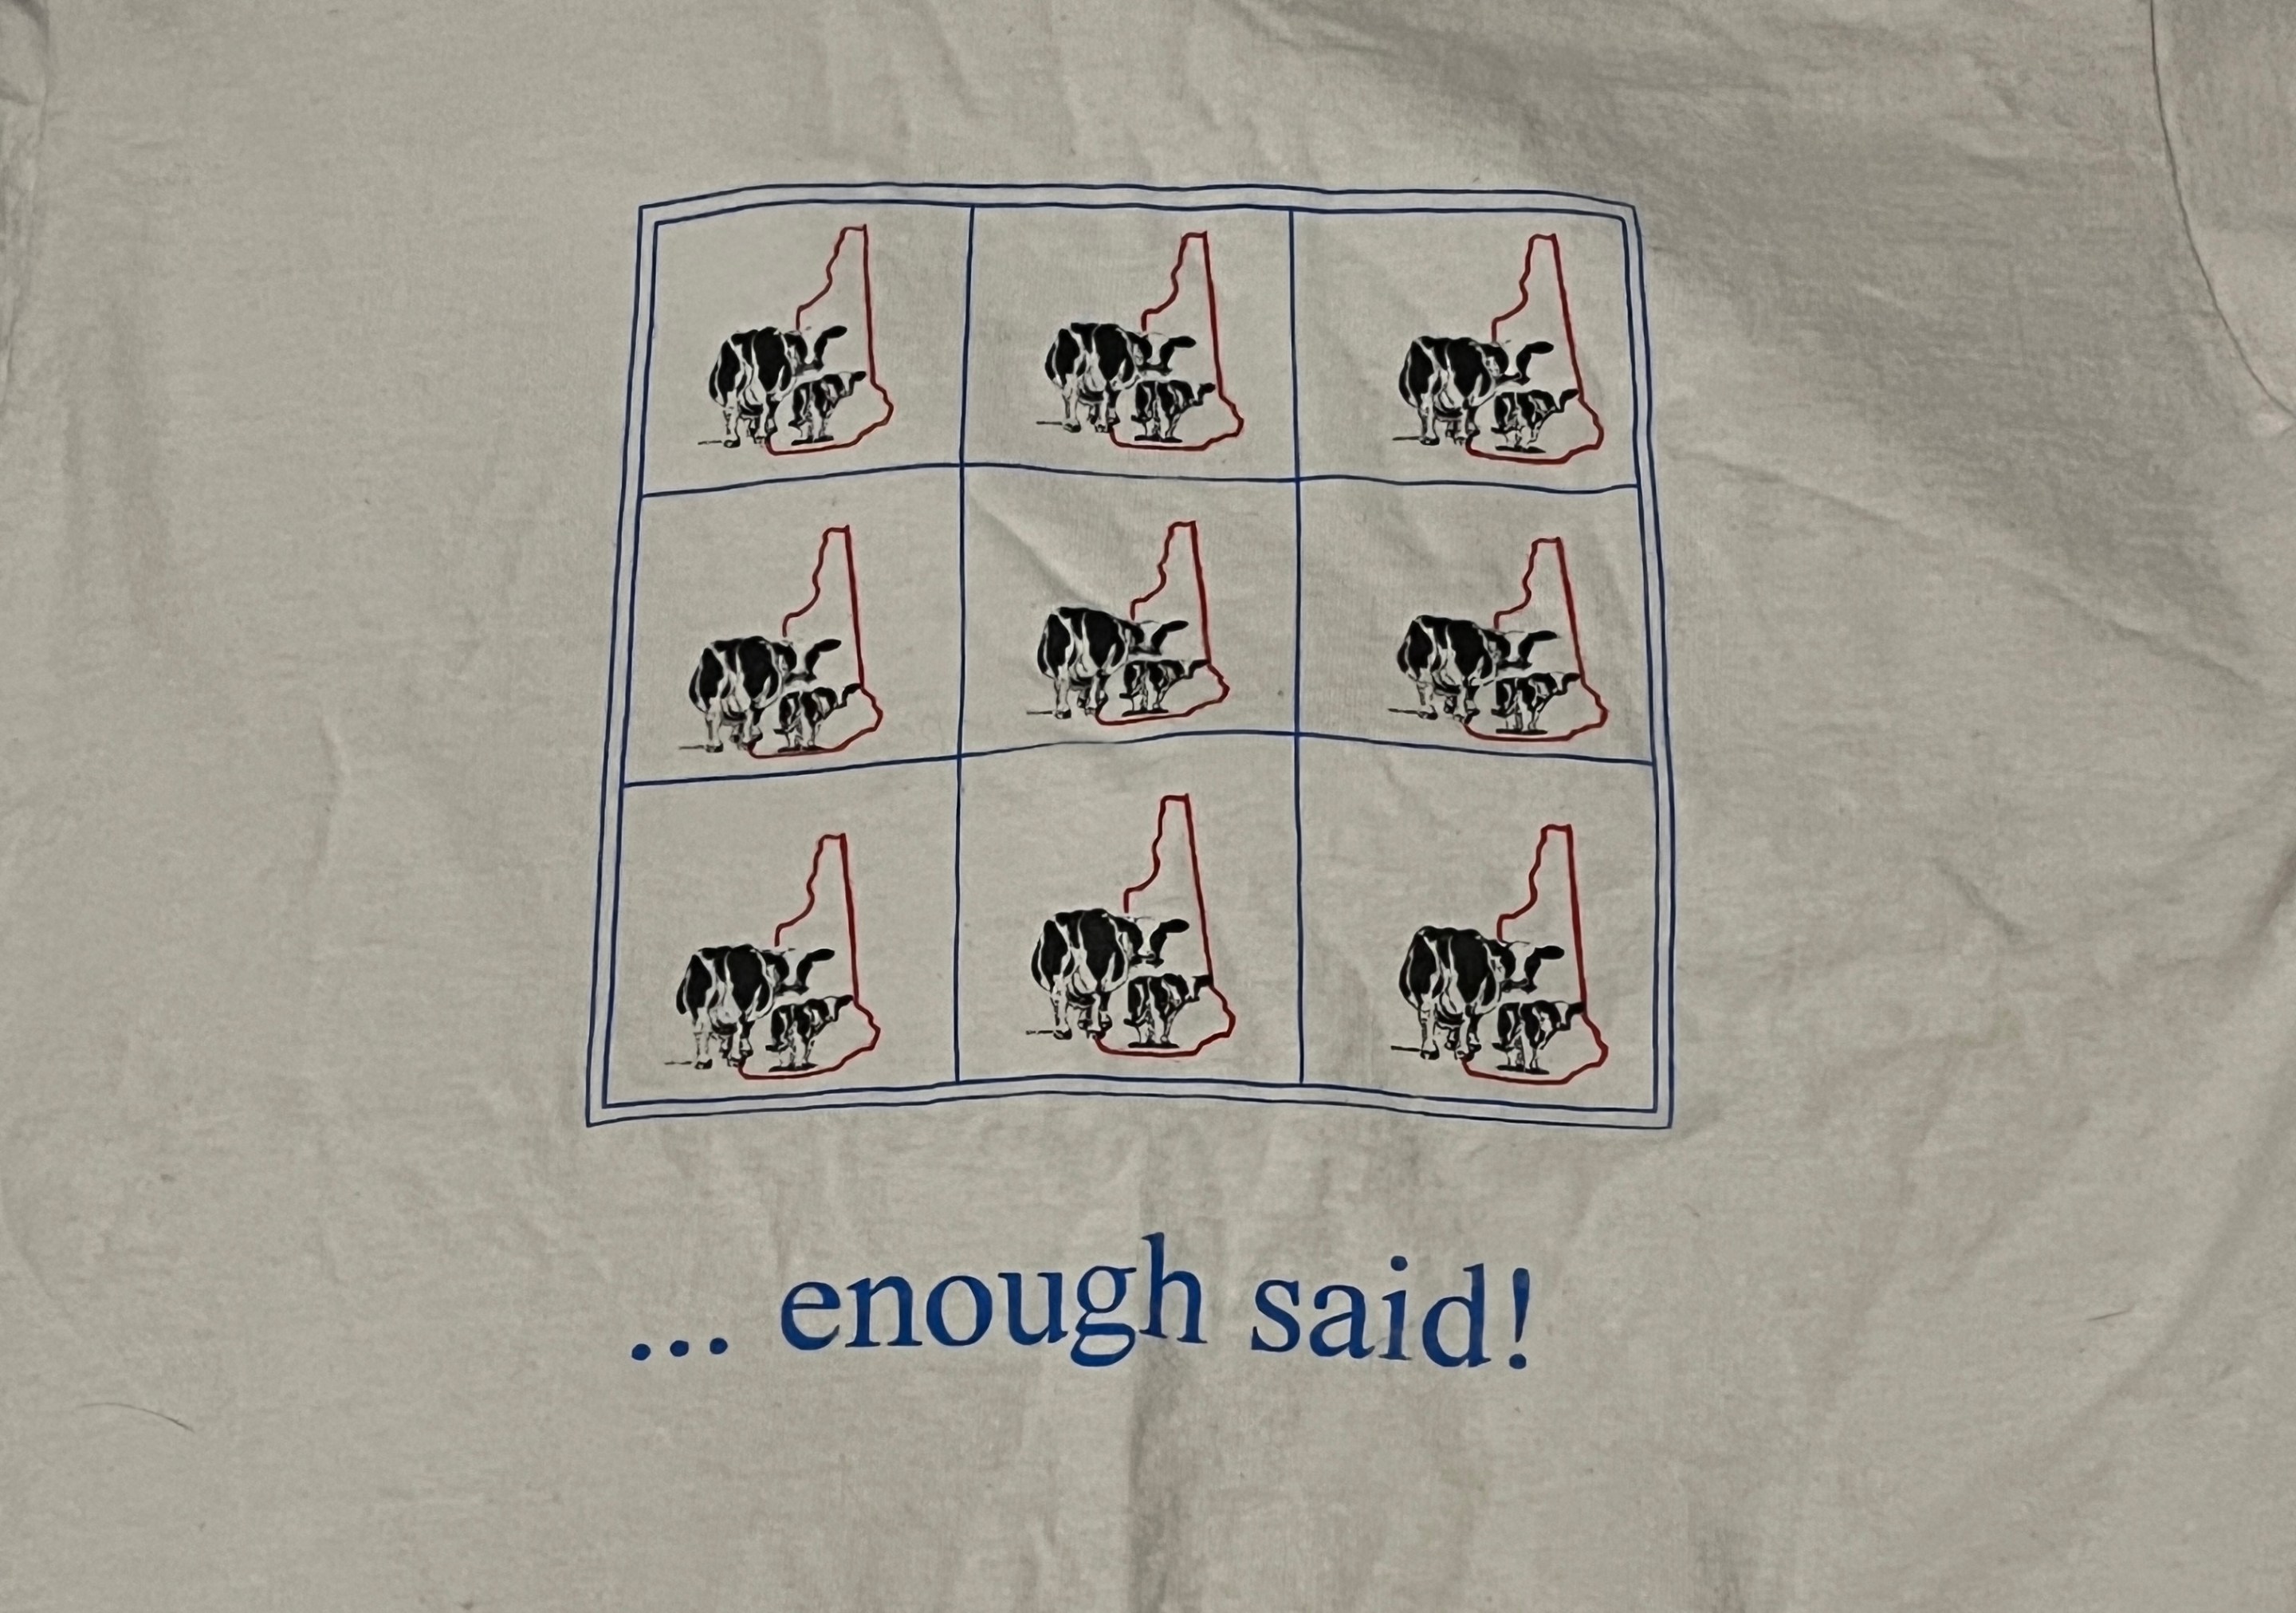 A t-shirt with a three-by-three grid. Each box has two cows standing in front of the state of New Hampshire. The bottom of the shirt says "... enough said!"